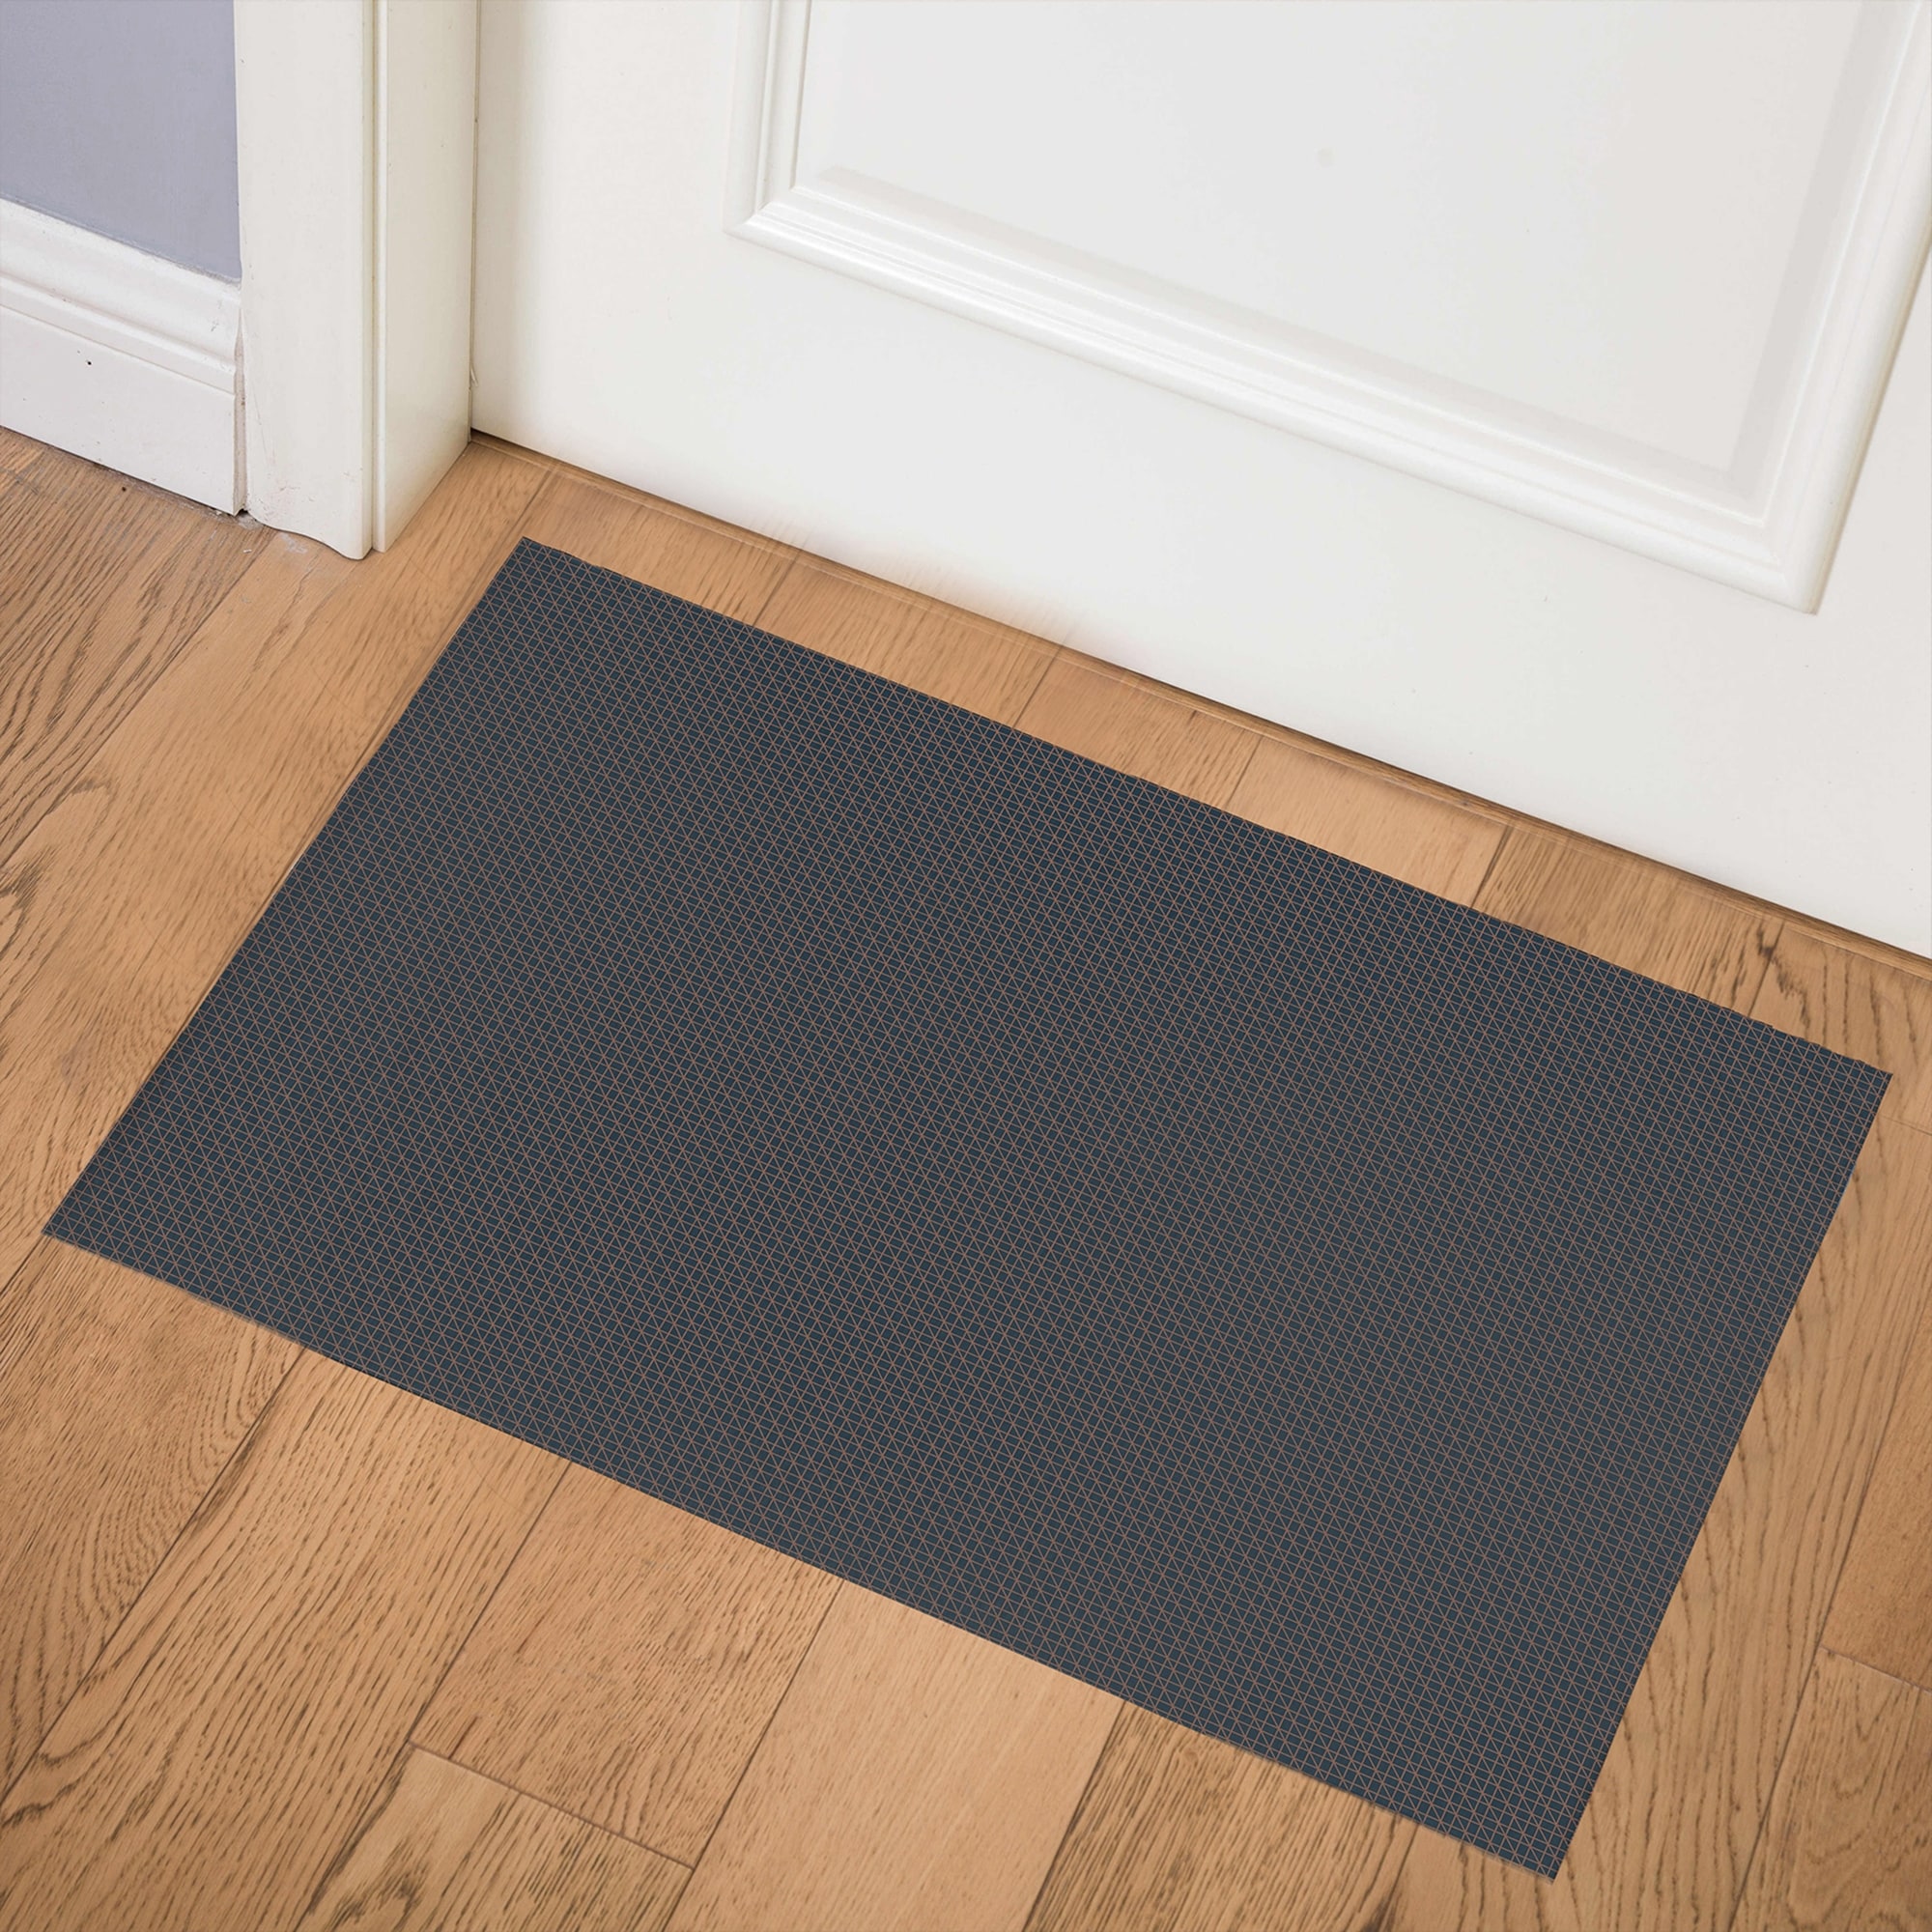 https://ak1.ostkcdn.com/images/products/is/images/direct/e5d4ce2d7587f173a8053b386341b03d3131eb3f/AXIS-DARK-GREY-Indoor-Floor-Mat-By-Becky-Bailey.jpg